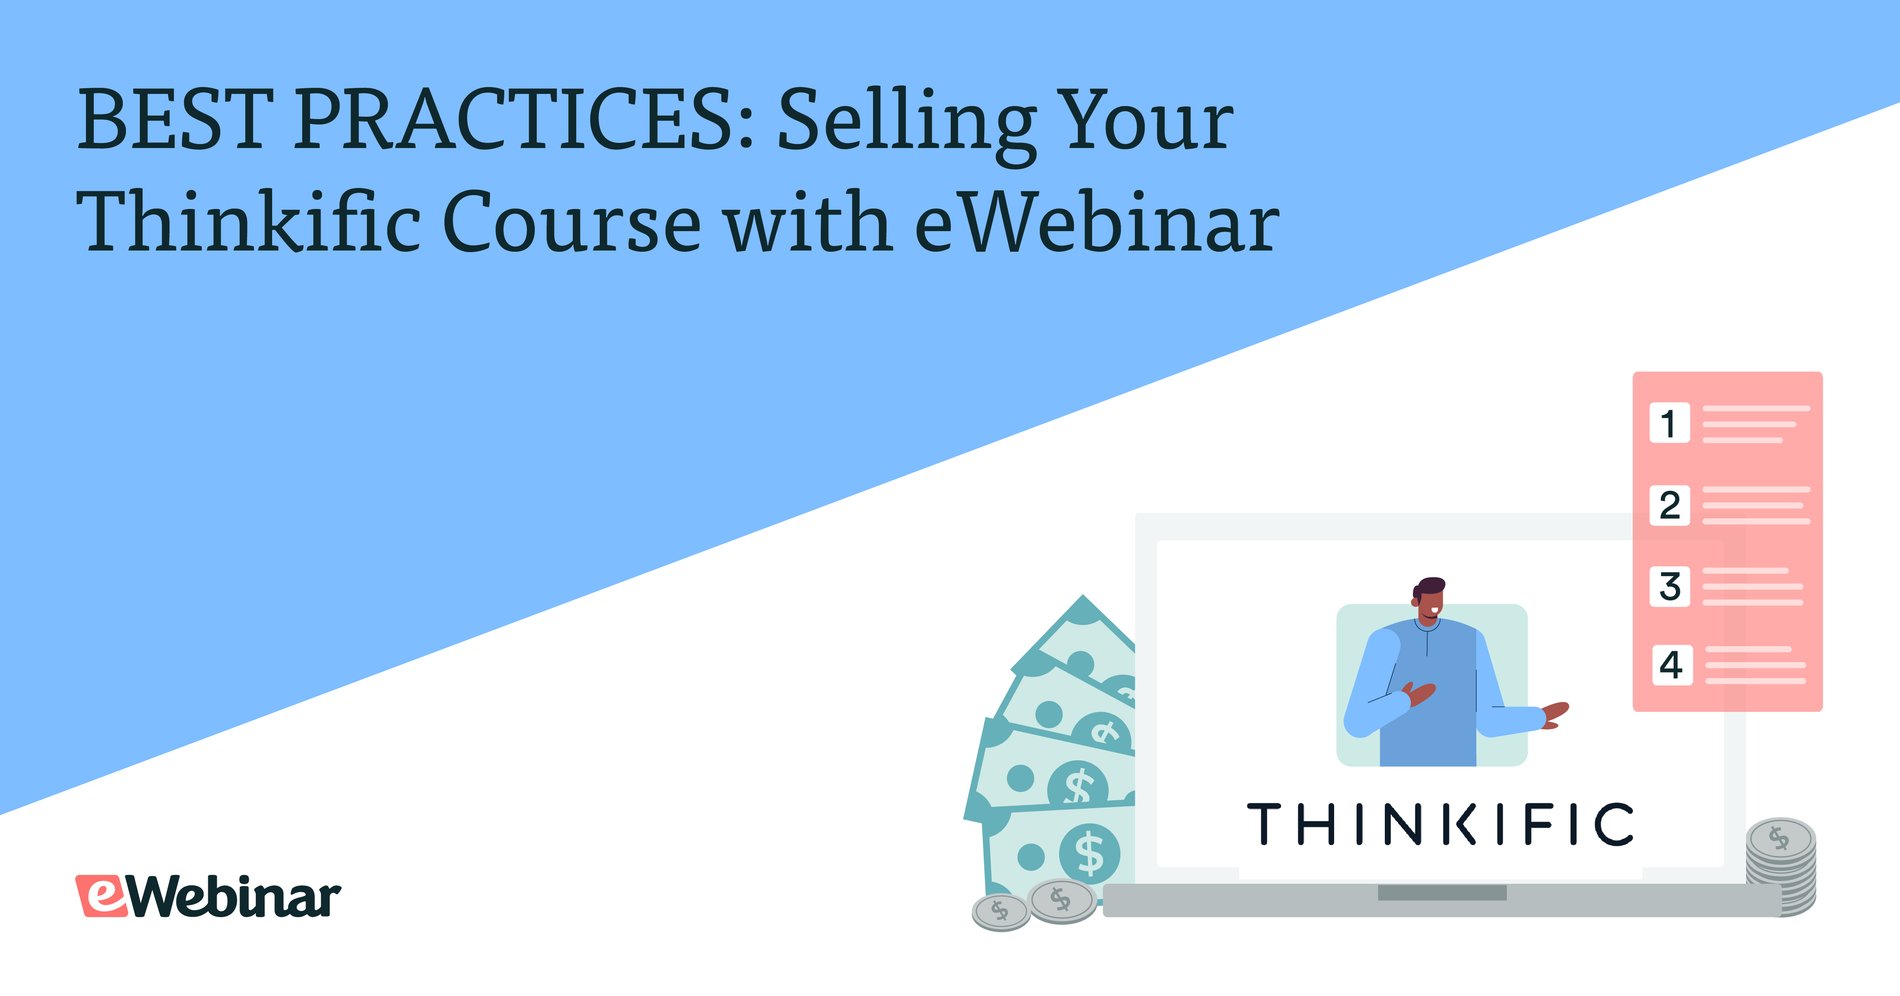 BEST PRACTICES: Selling Your Thinkific Course with eWebinar